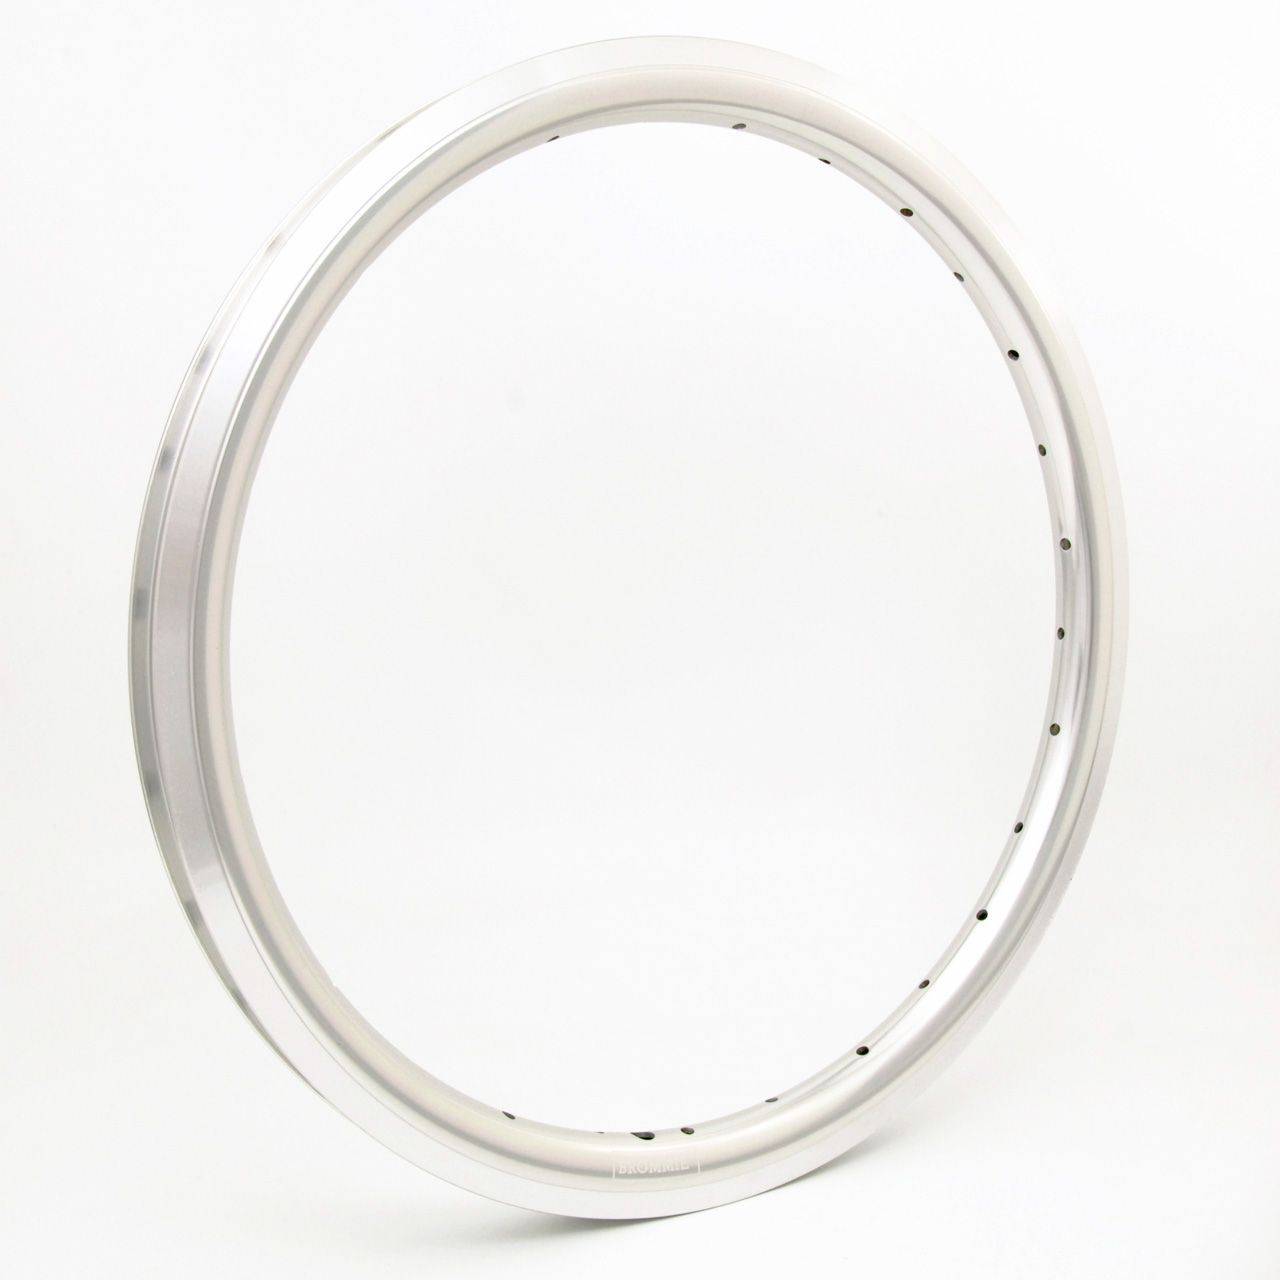 BrommiePlus R001 Welded Double Wall Rim - Polished Silver